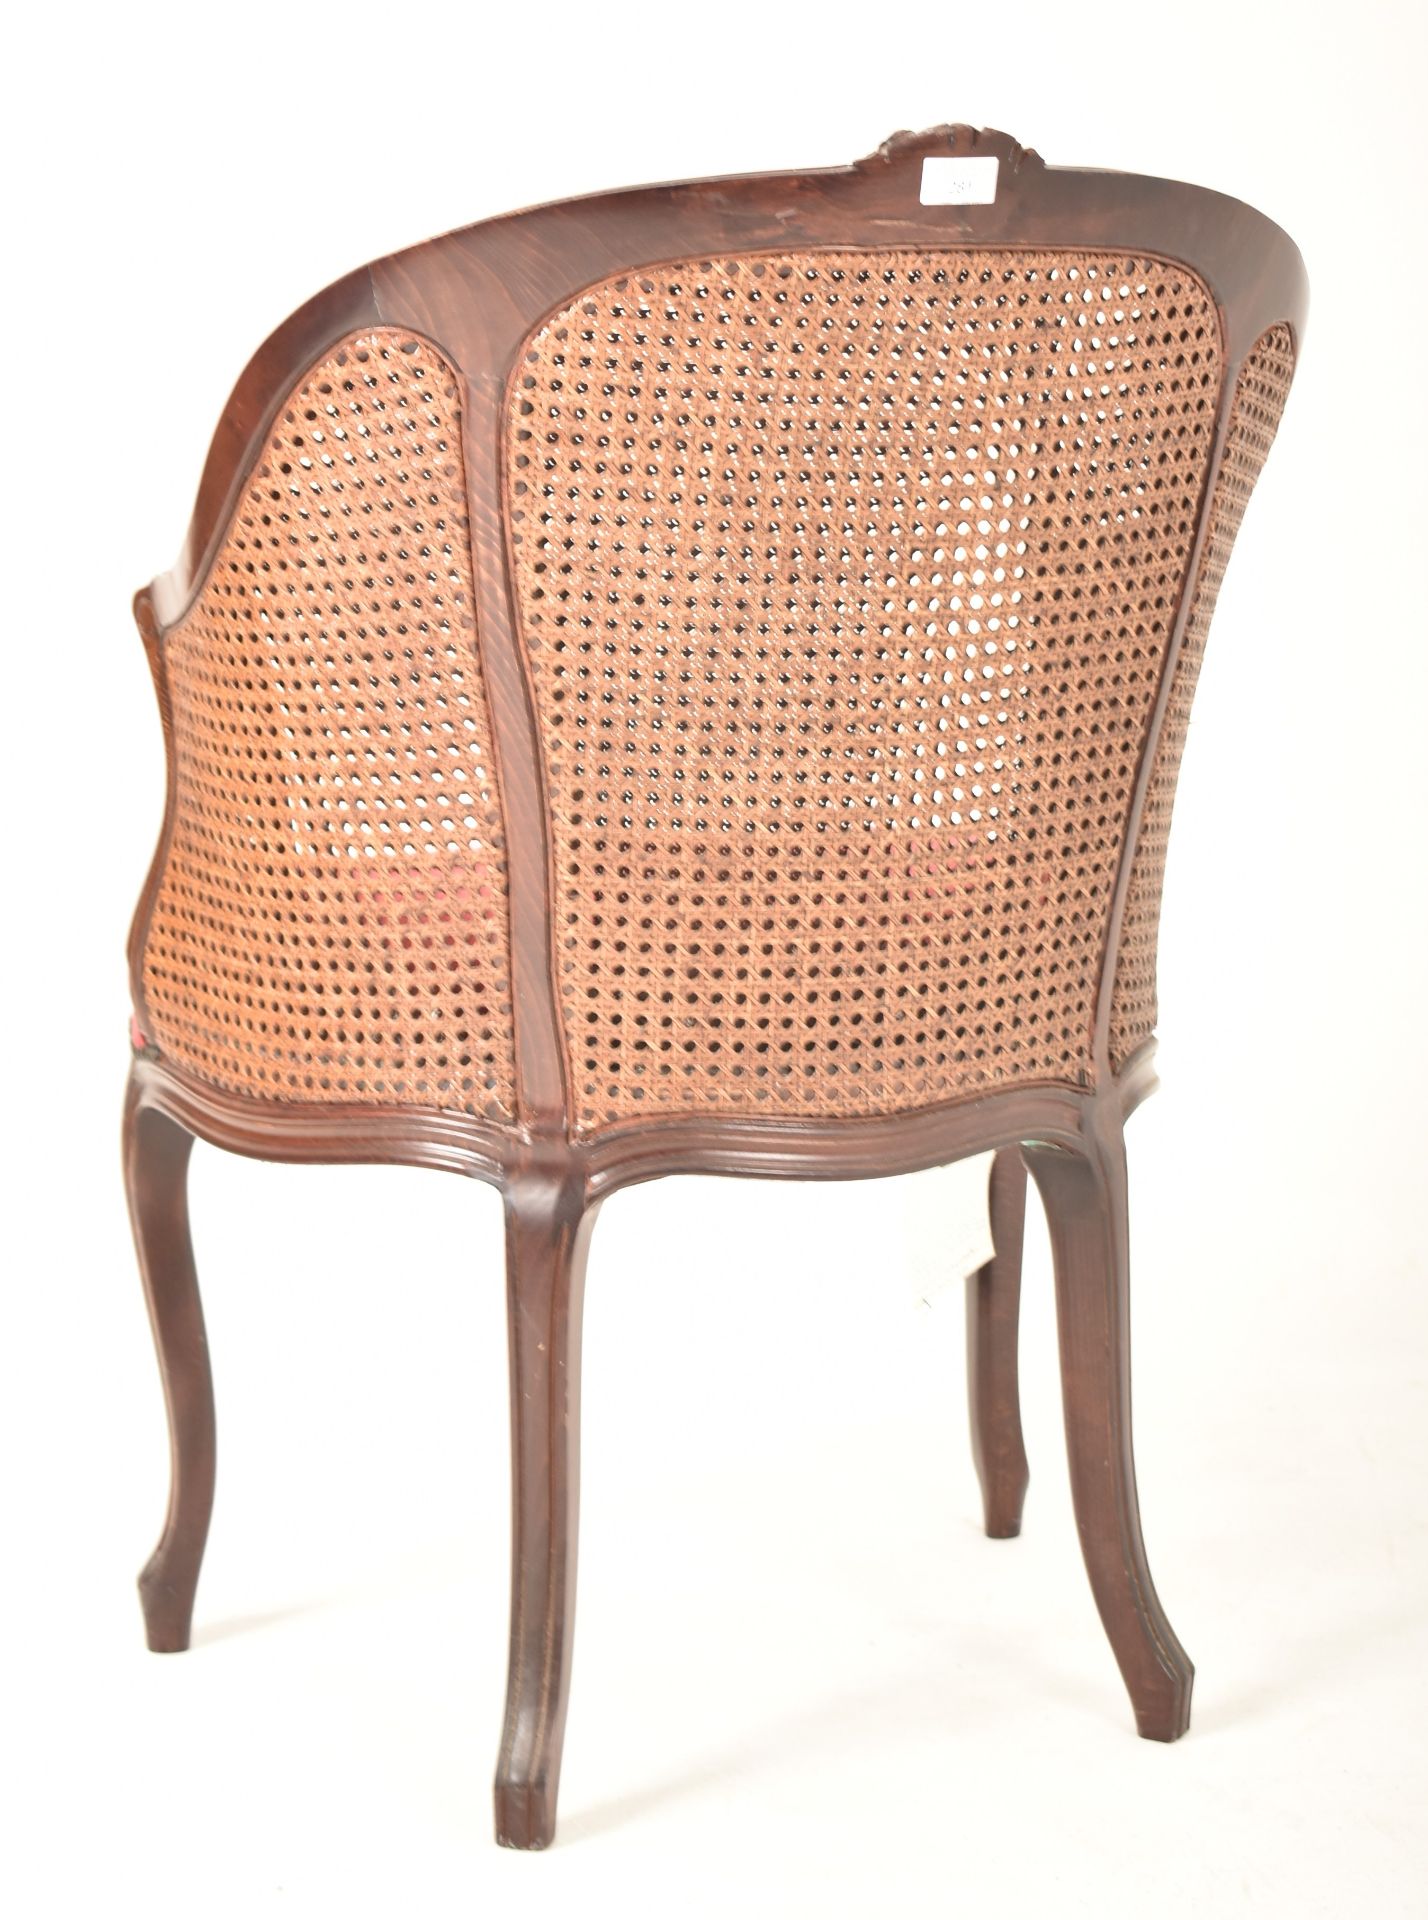 FRENCH LOUIS XV STYLE BEECH & DOUBLE CANE ARMCHAIR - Image 6 of 6